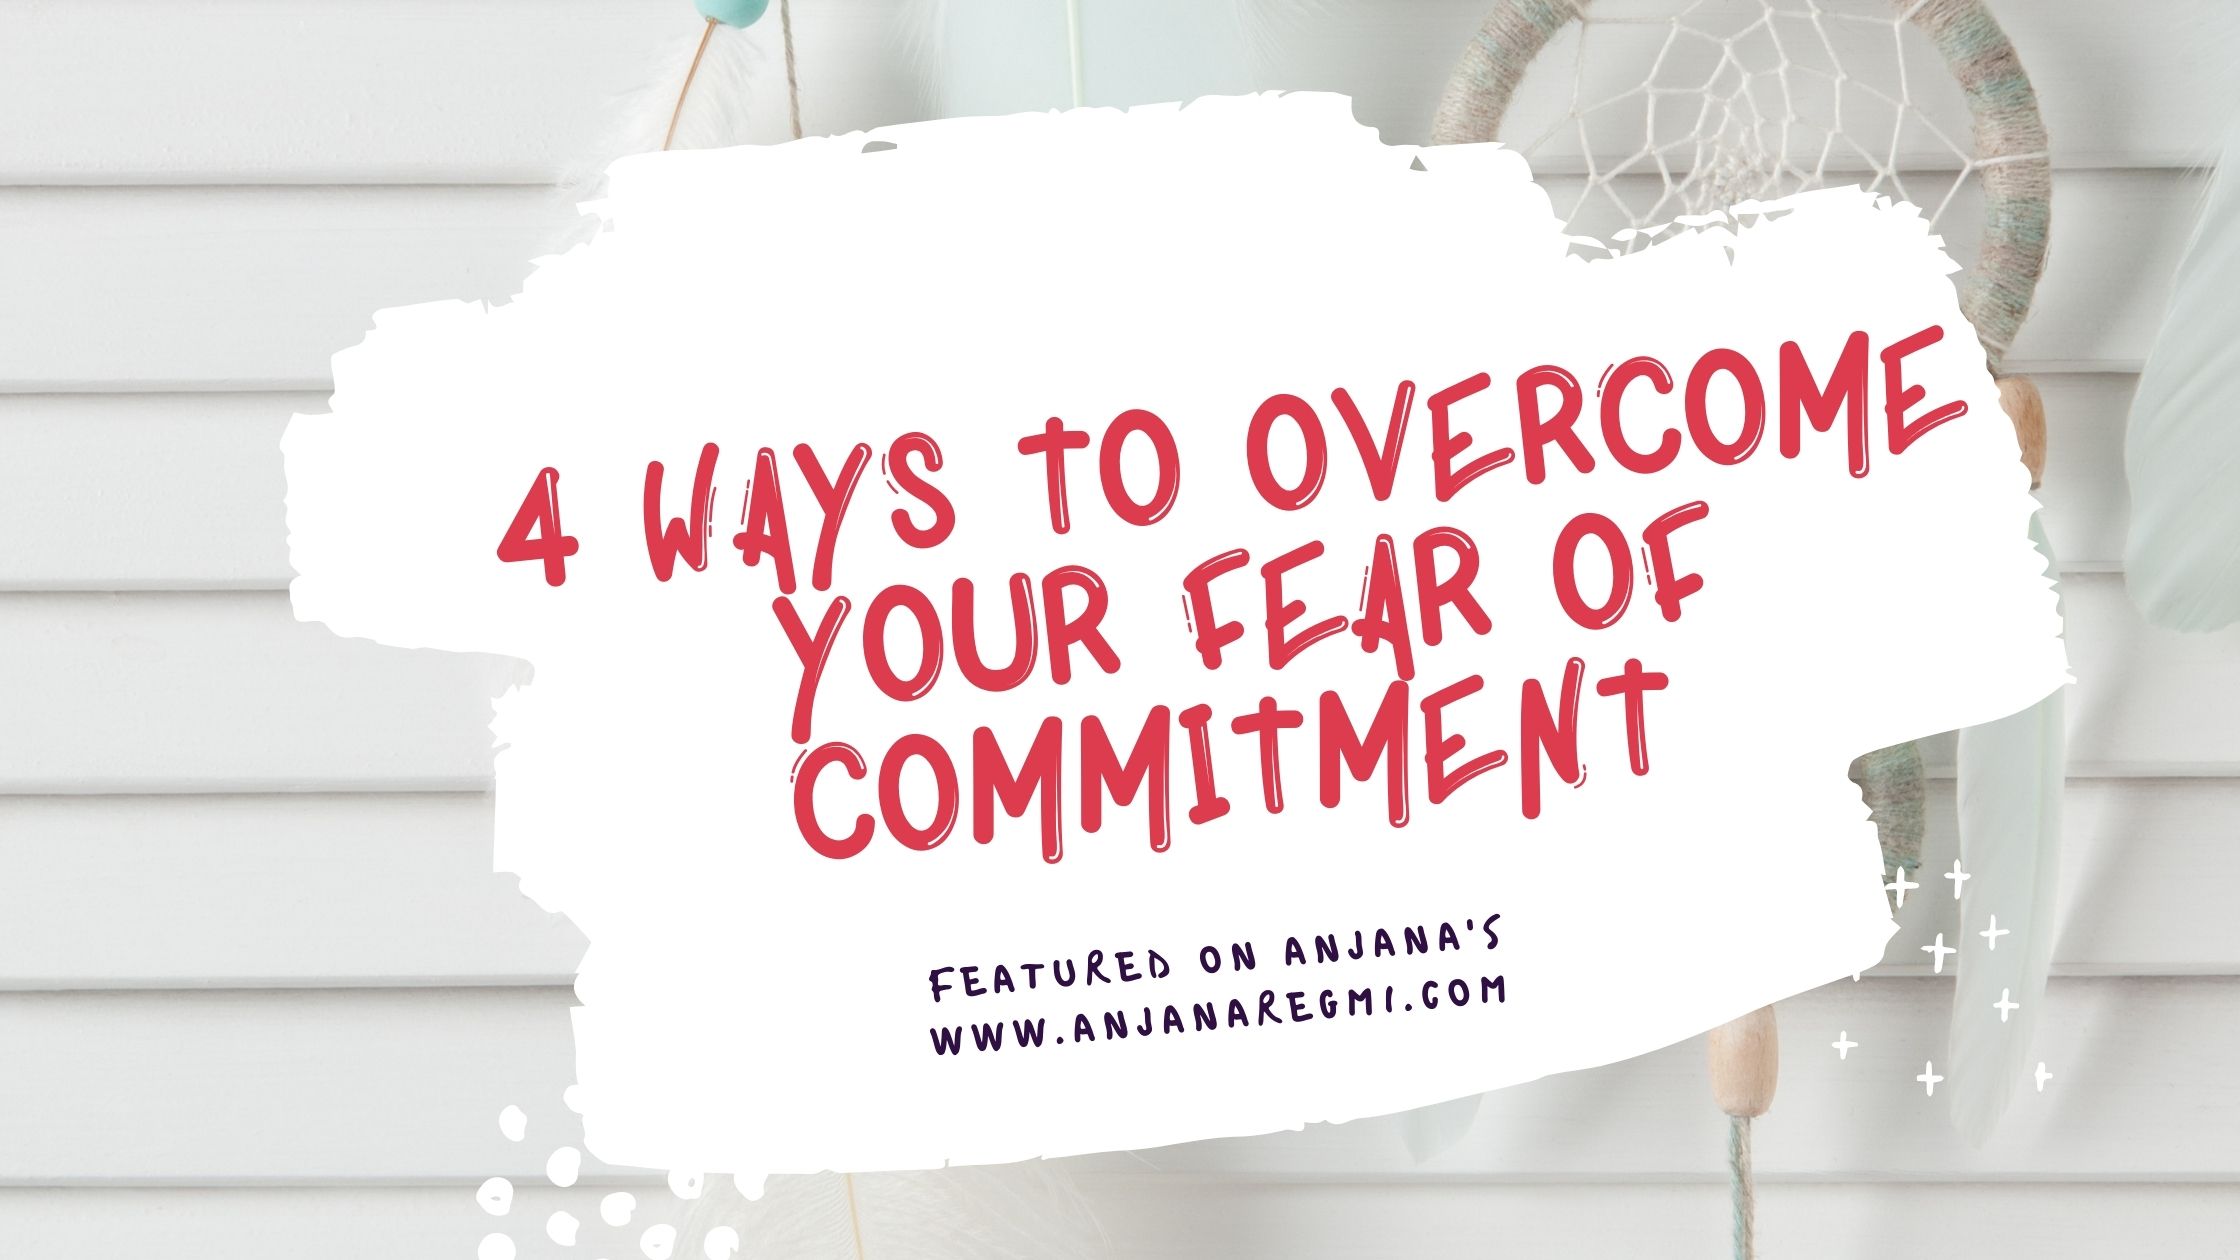 Fear of commitment